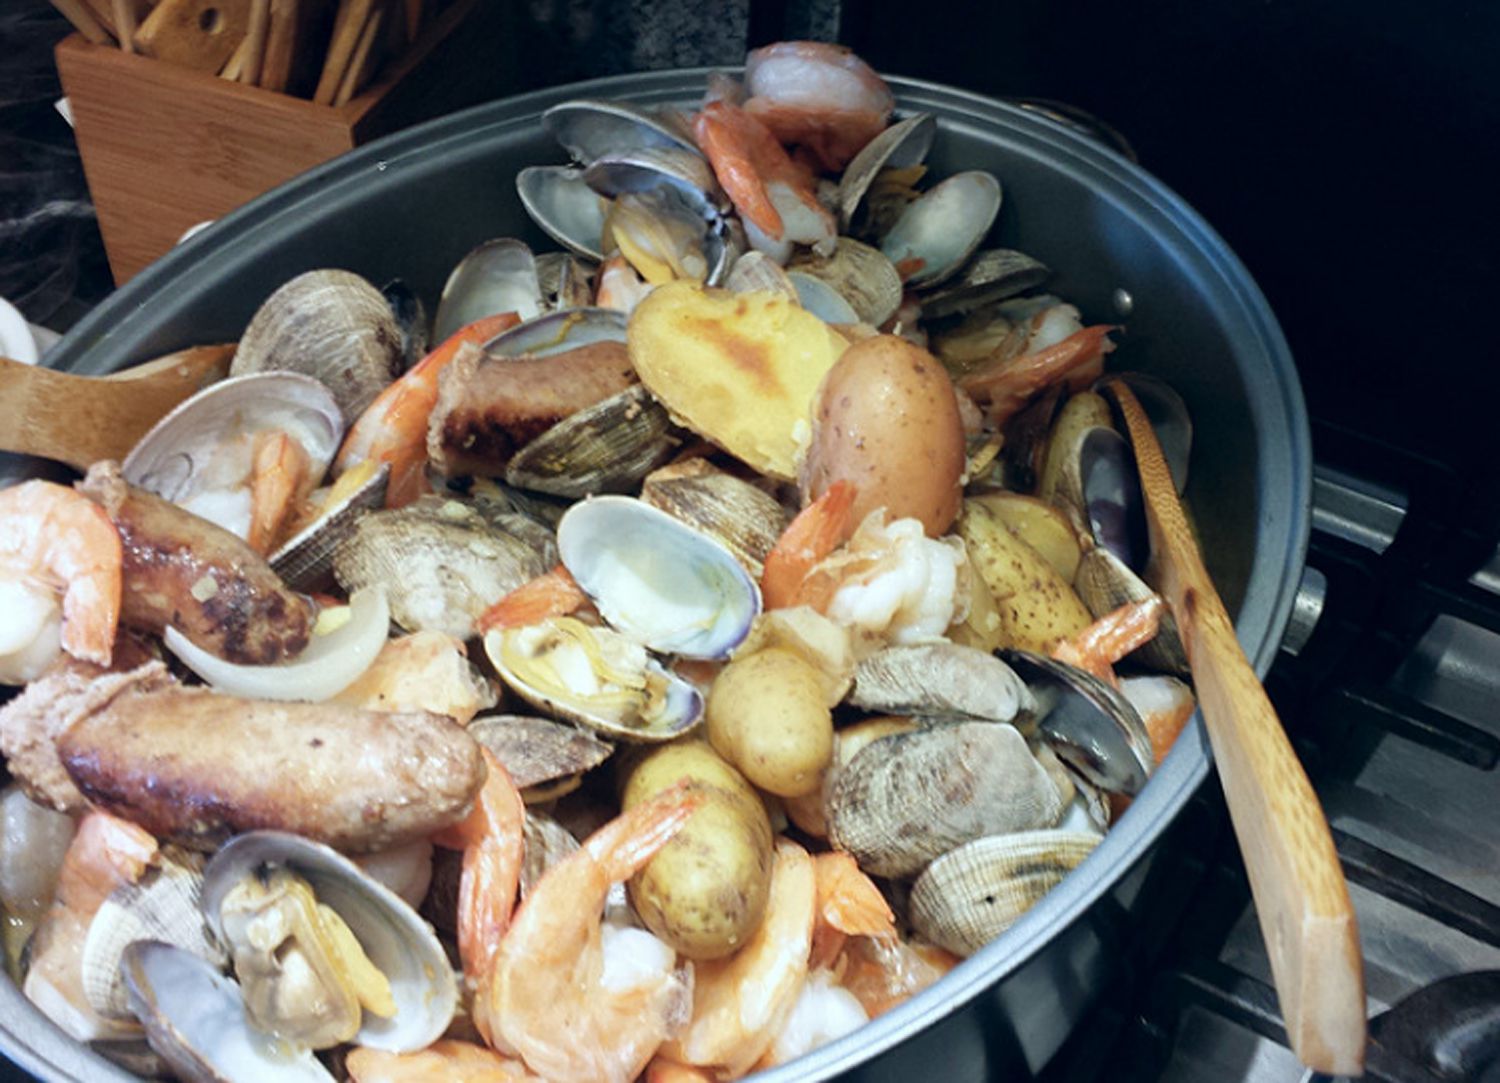 How To Have A Proper Clambake